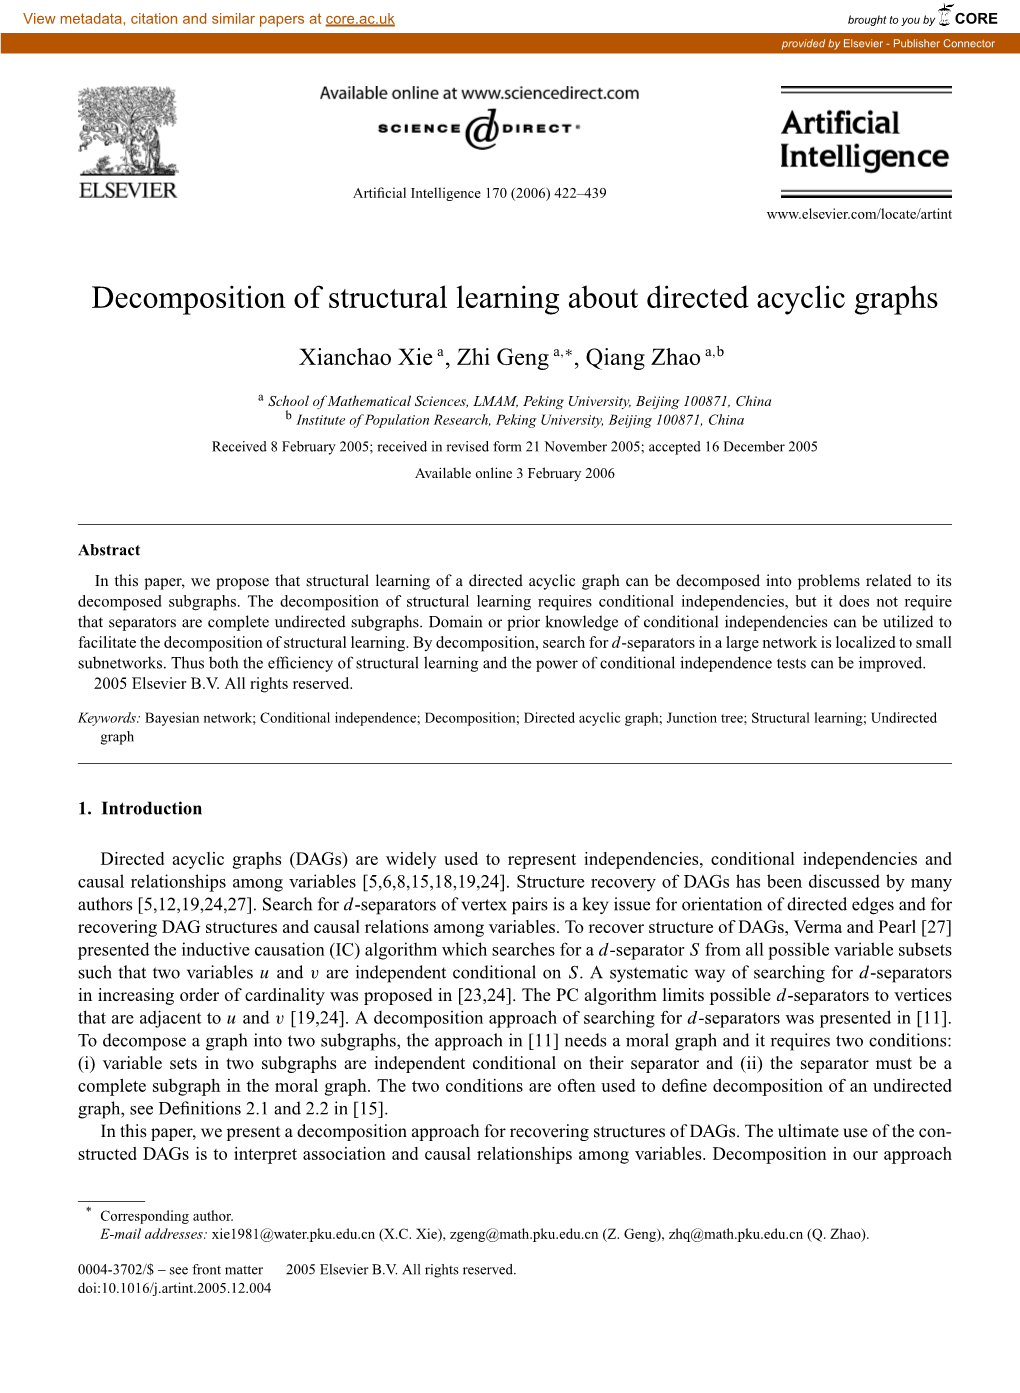 Decomposition of Structural Learning About Directed Acyclic Graphs